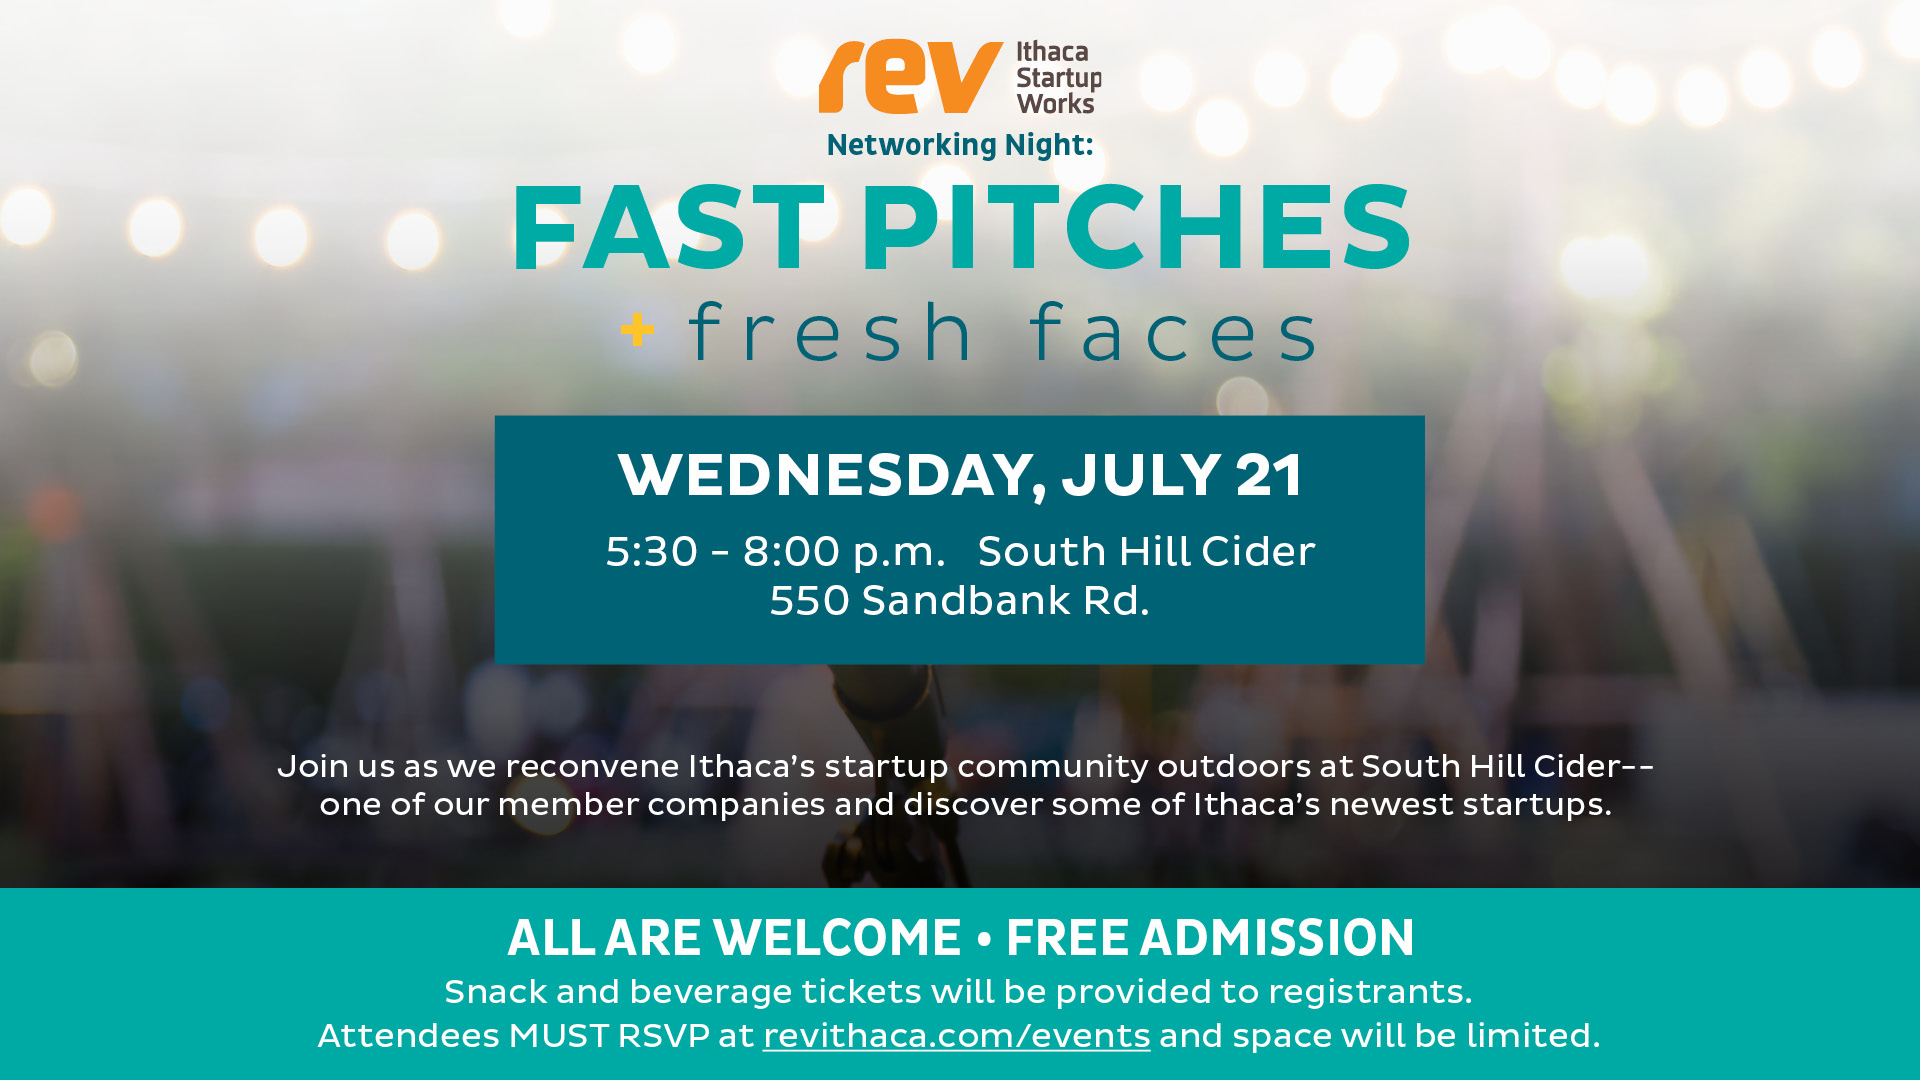 Rev Networking Night: Fast Pitches + Fresh Faces, Wednesday, July 21